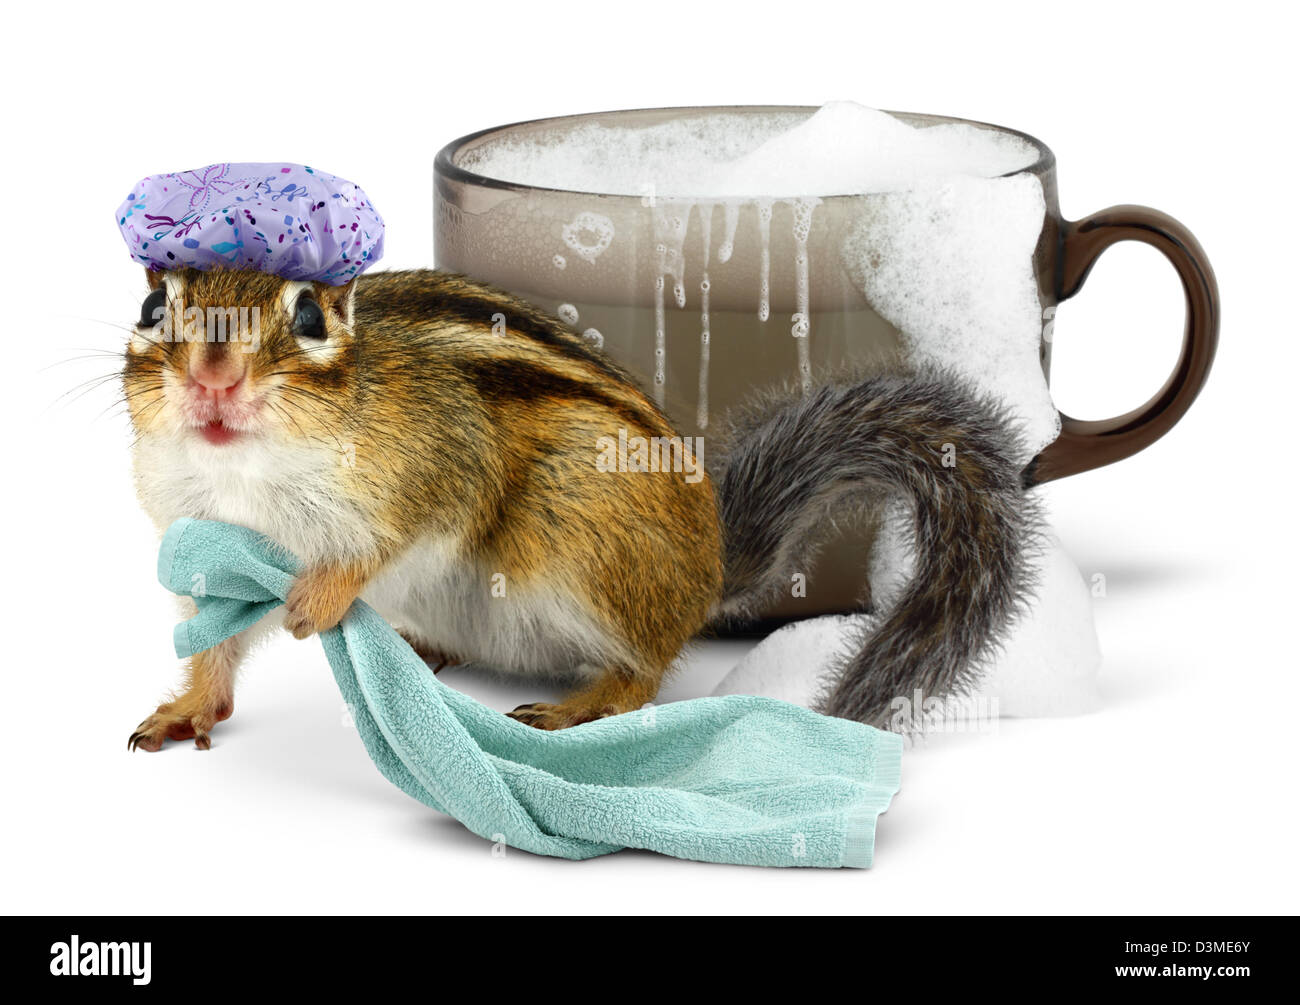 Funny chipmunk taking a bath in cup Stock Photo